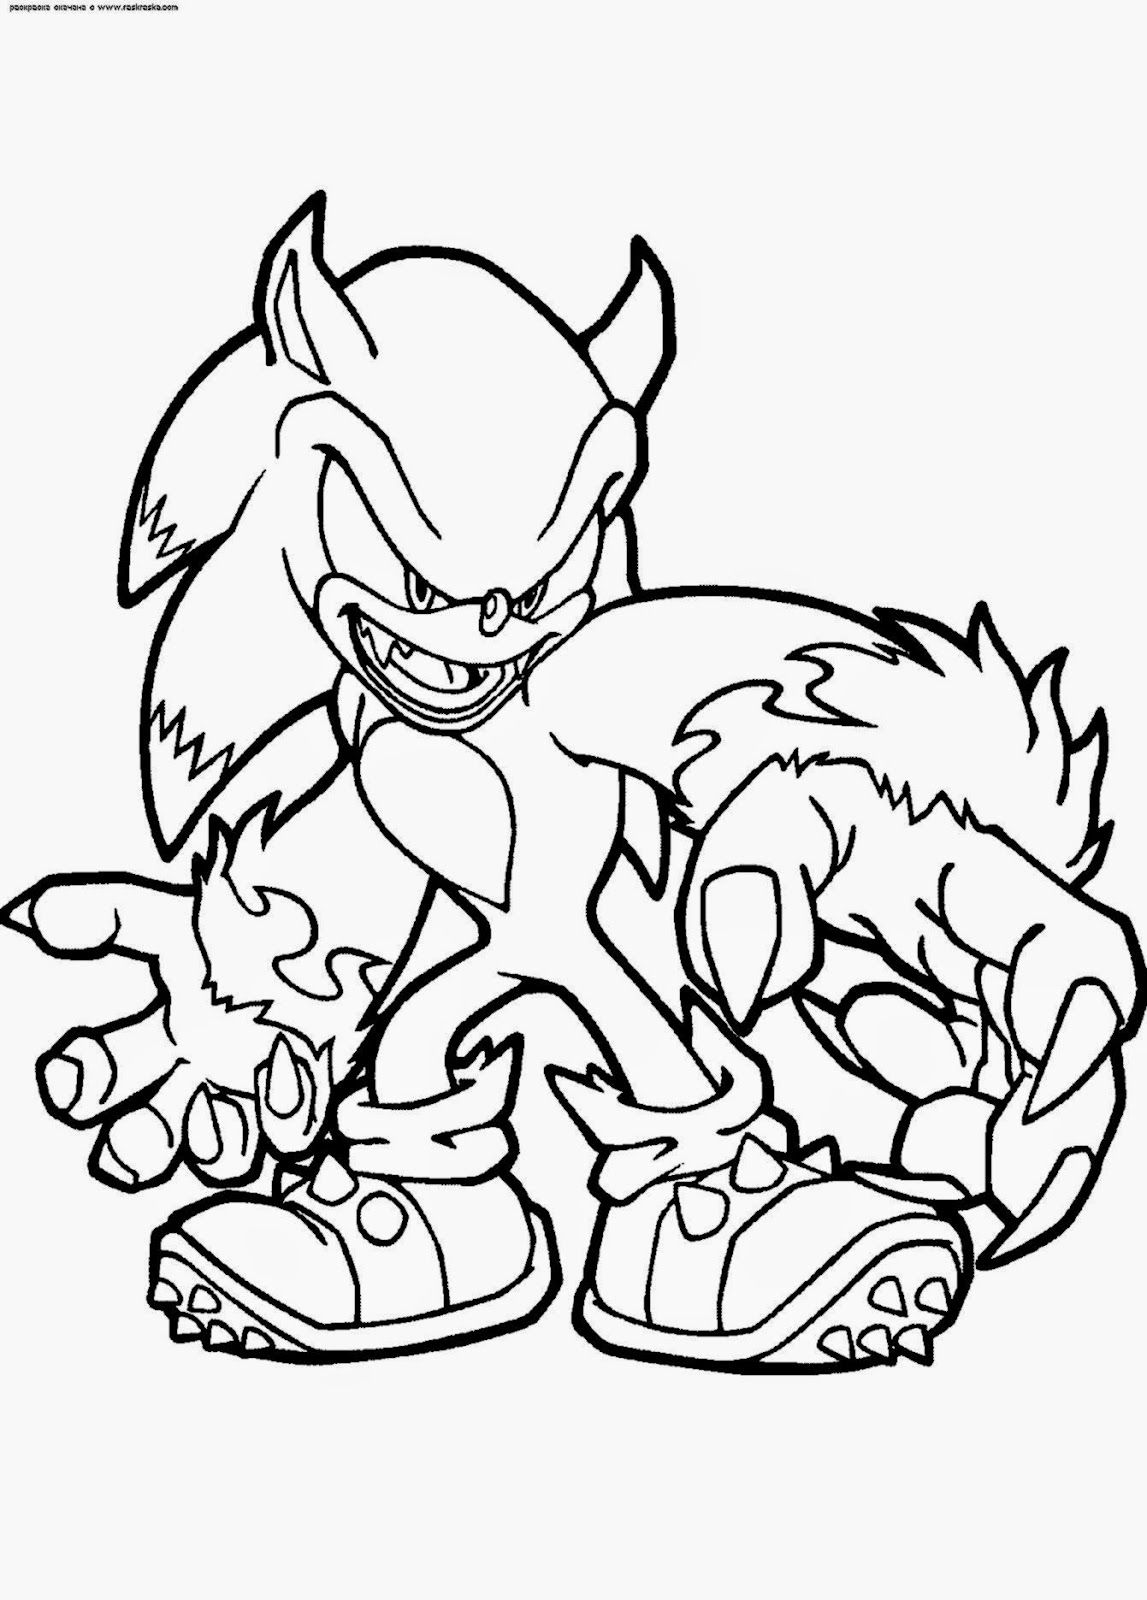 Sonic Coloring Book | Free Coloring Pages